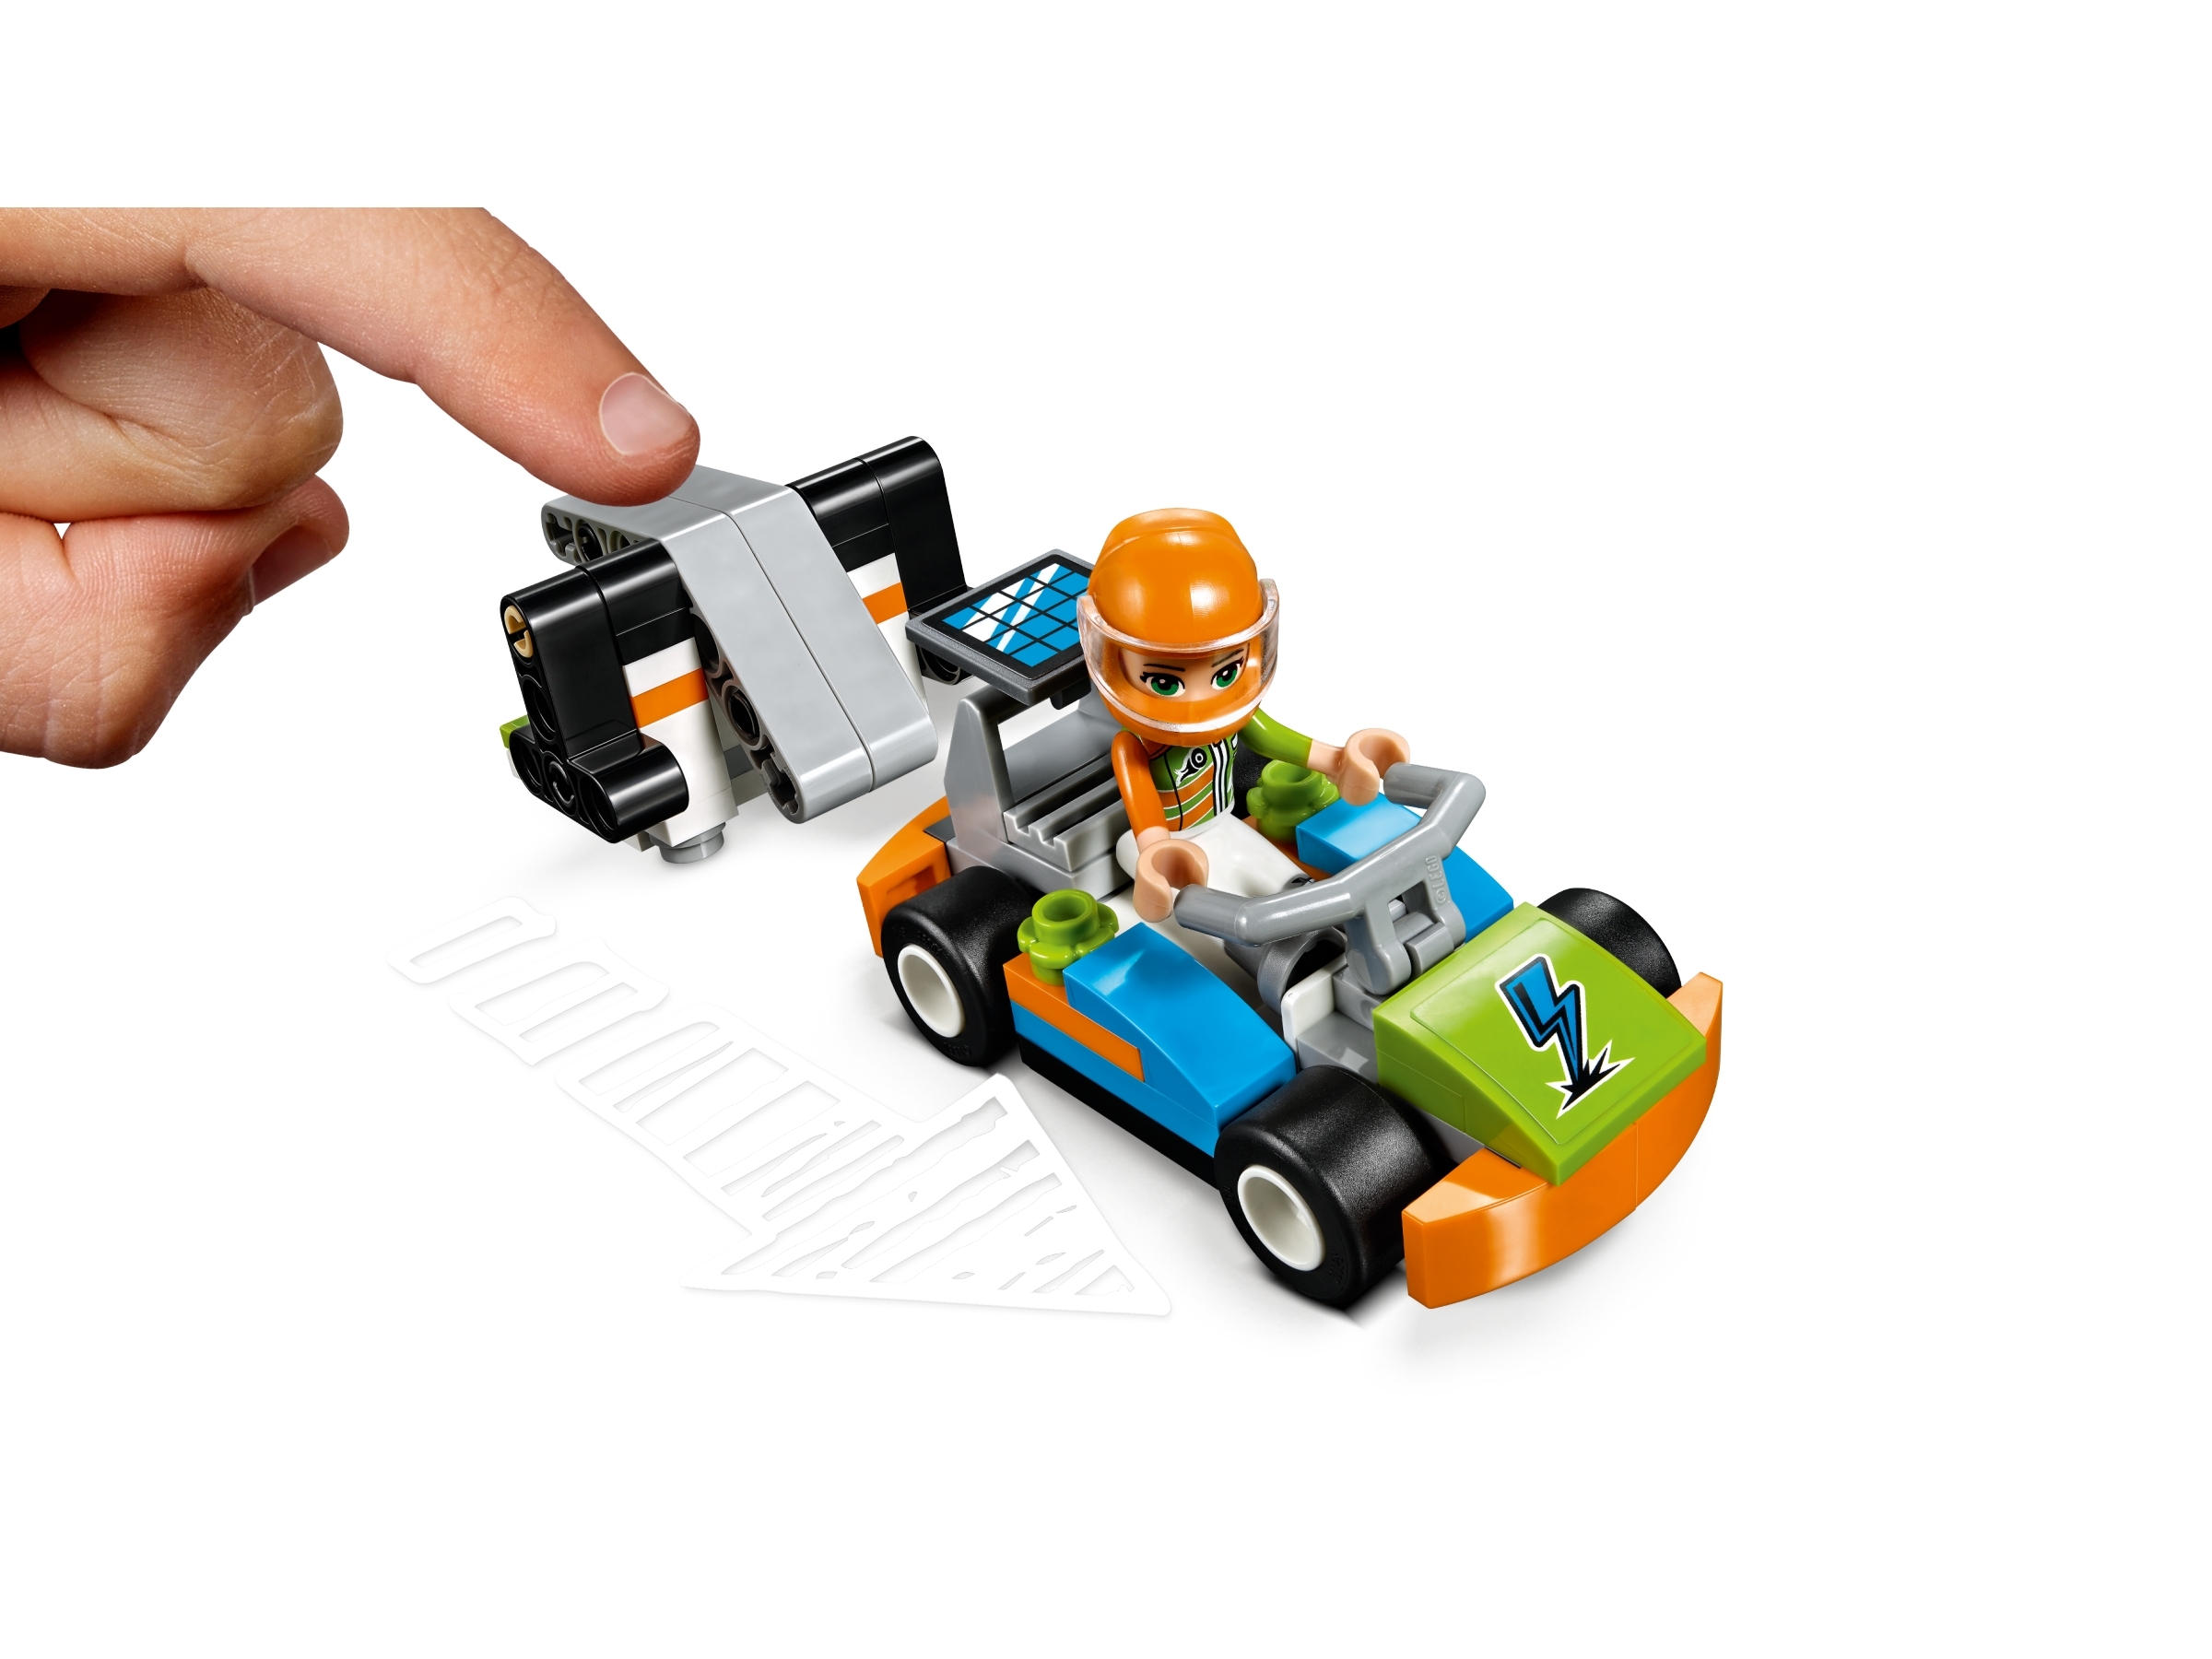 LEGO Friends Spinning Brushes Car Wash 41350 